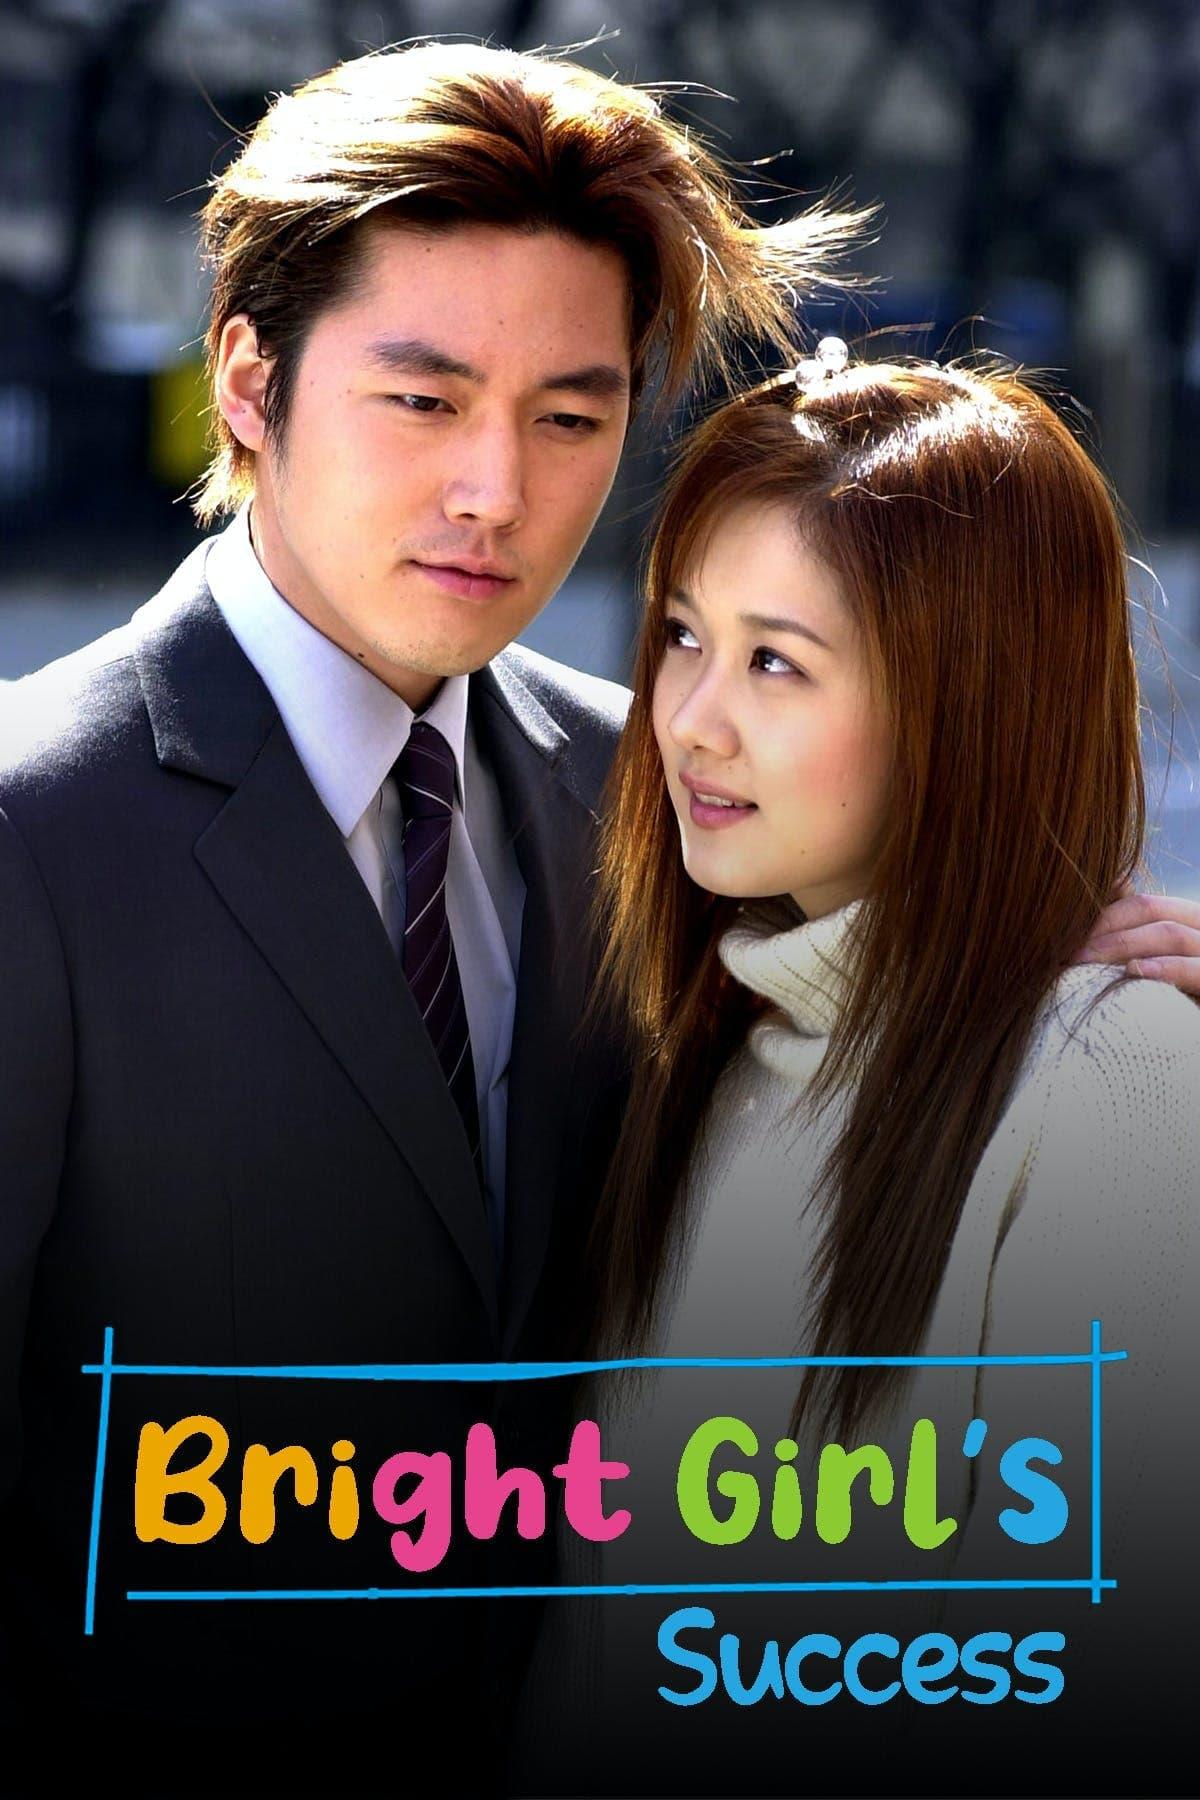 Bright Girl's Success poster